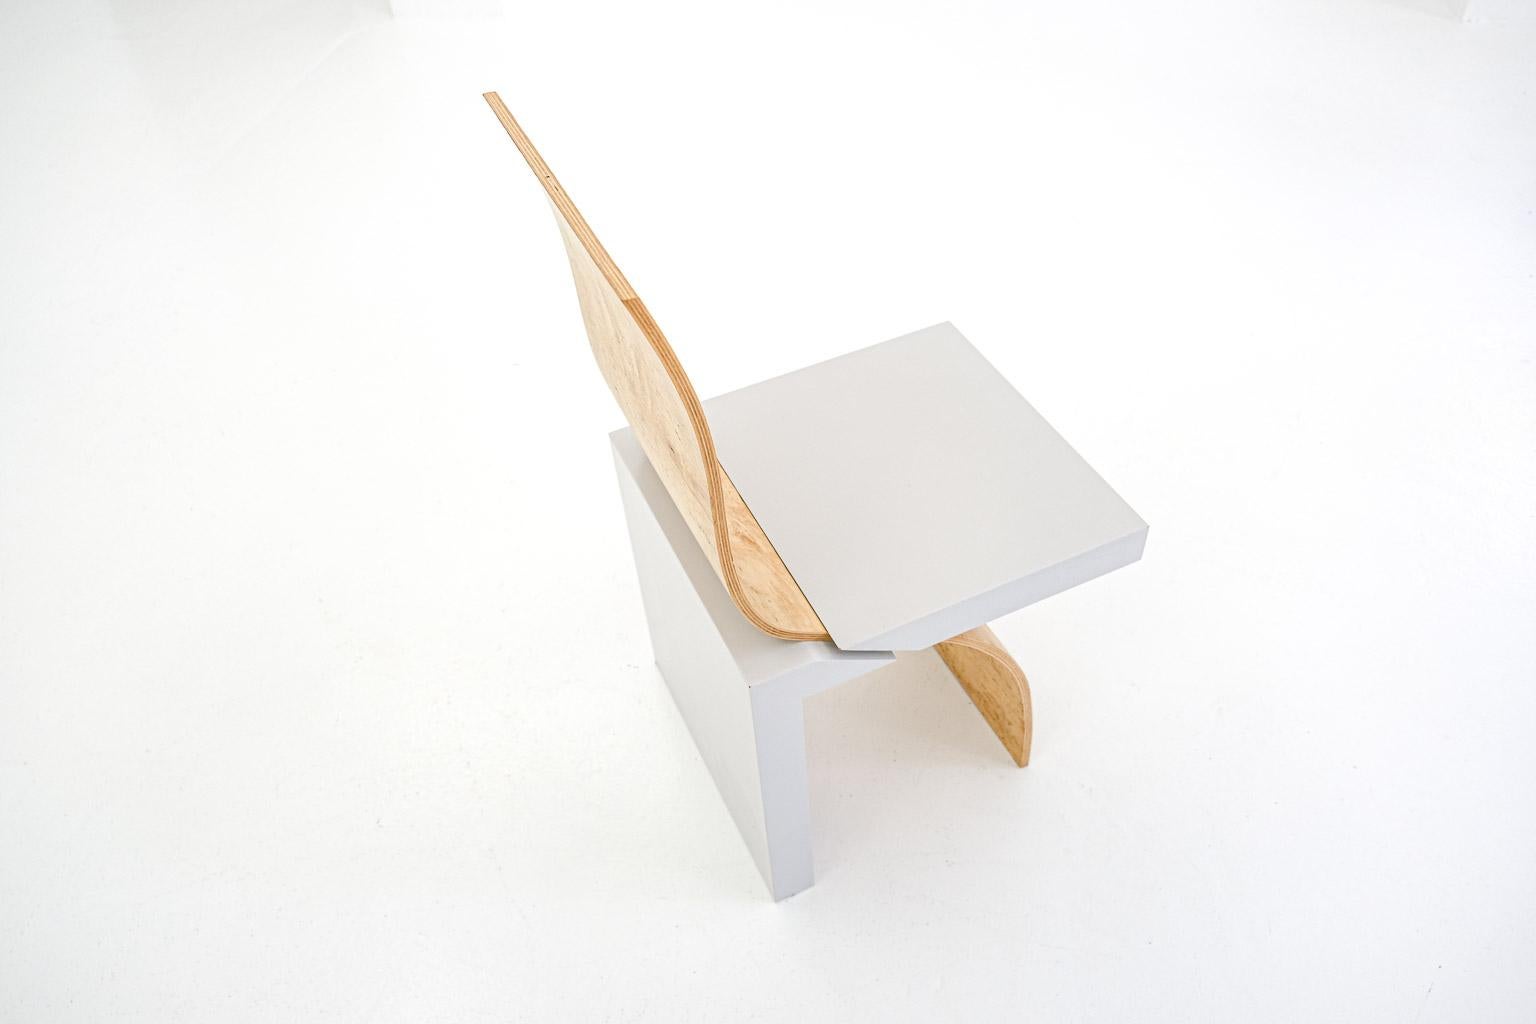  Post-Modern Object Chair Leda by Angela Oedekoven, no 26, limited edition of 50 In Good Condition For Sale In Frankfurt am Main, DE